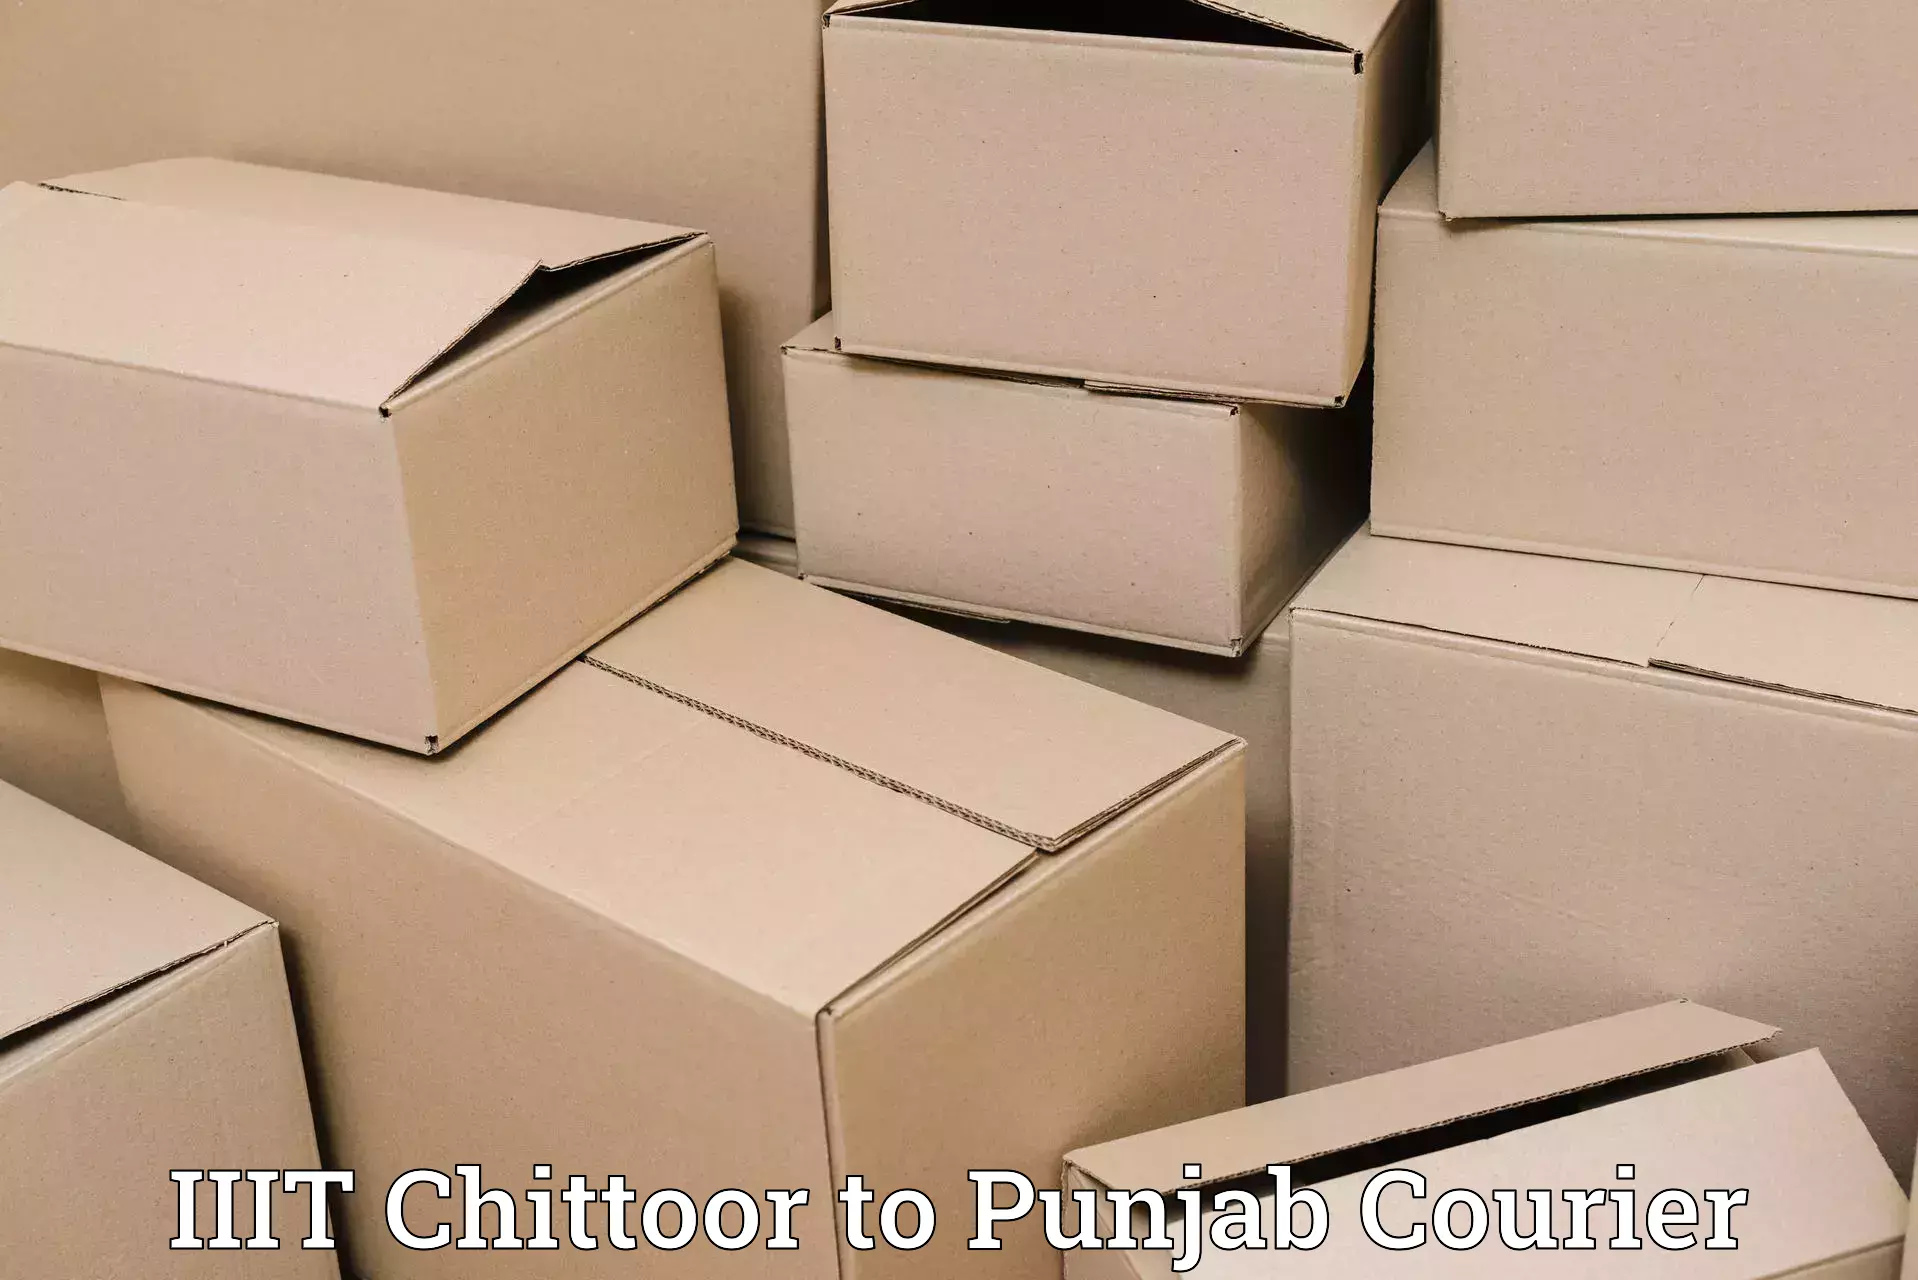 Express postal services in IIIT Chittoor to Firozpur